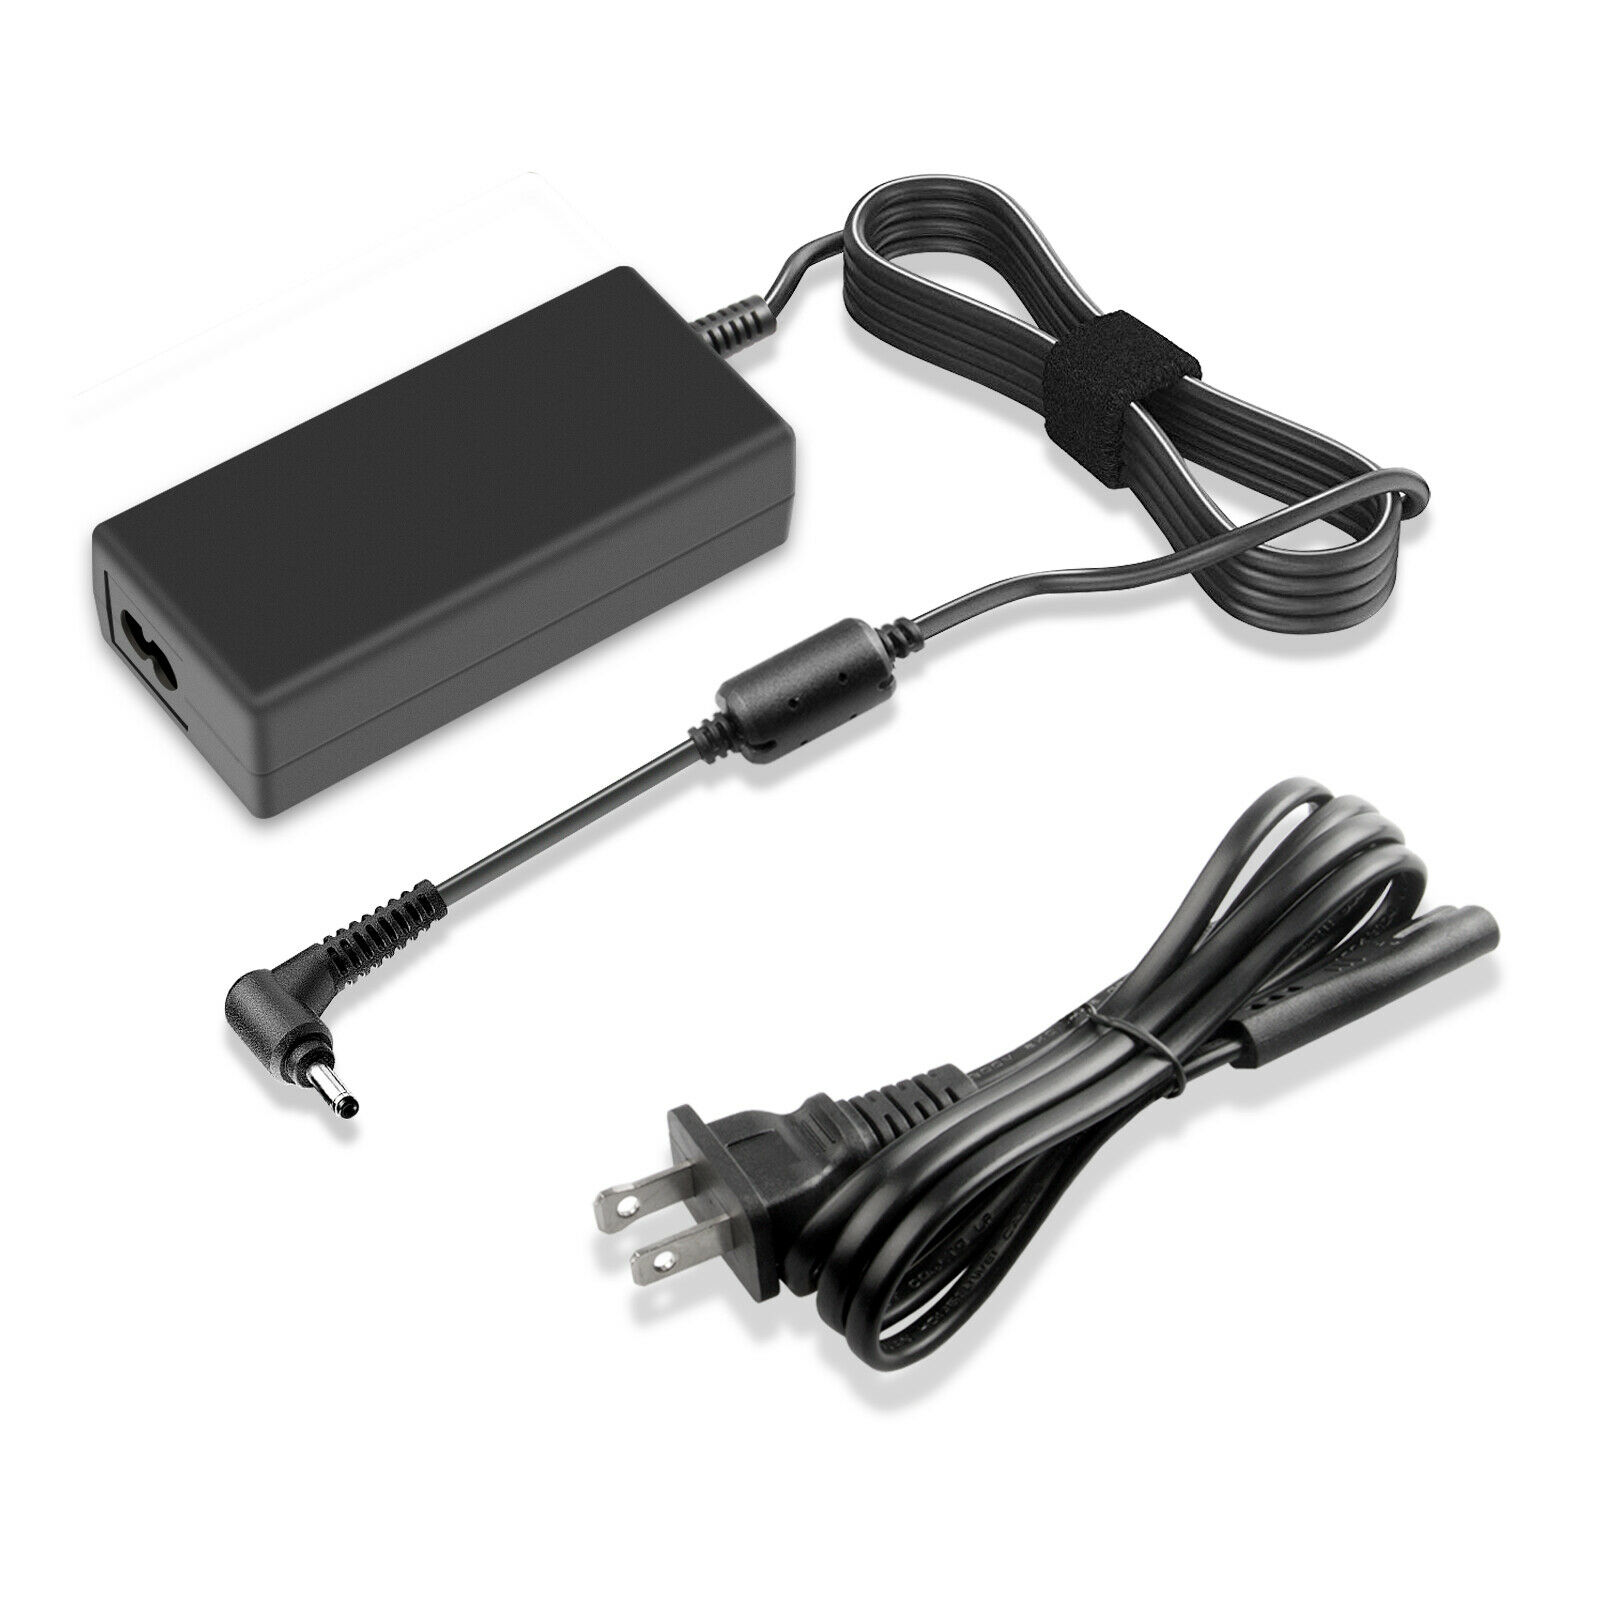 Lenovo N21 Chromebook Replacement Power Adapter Charger